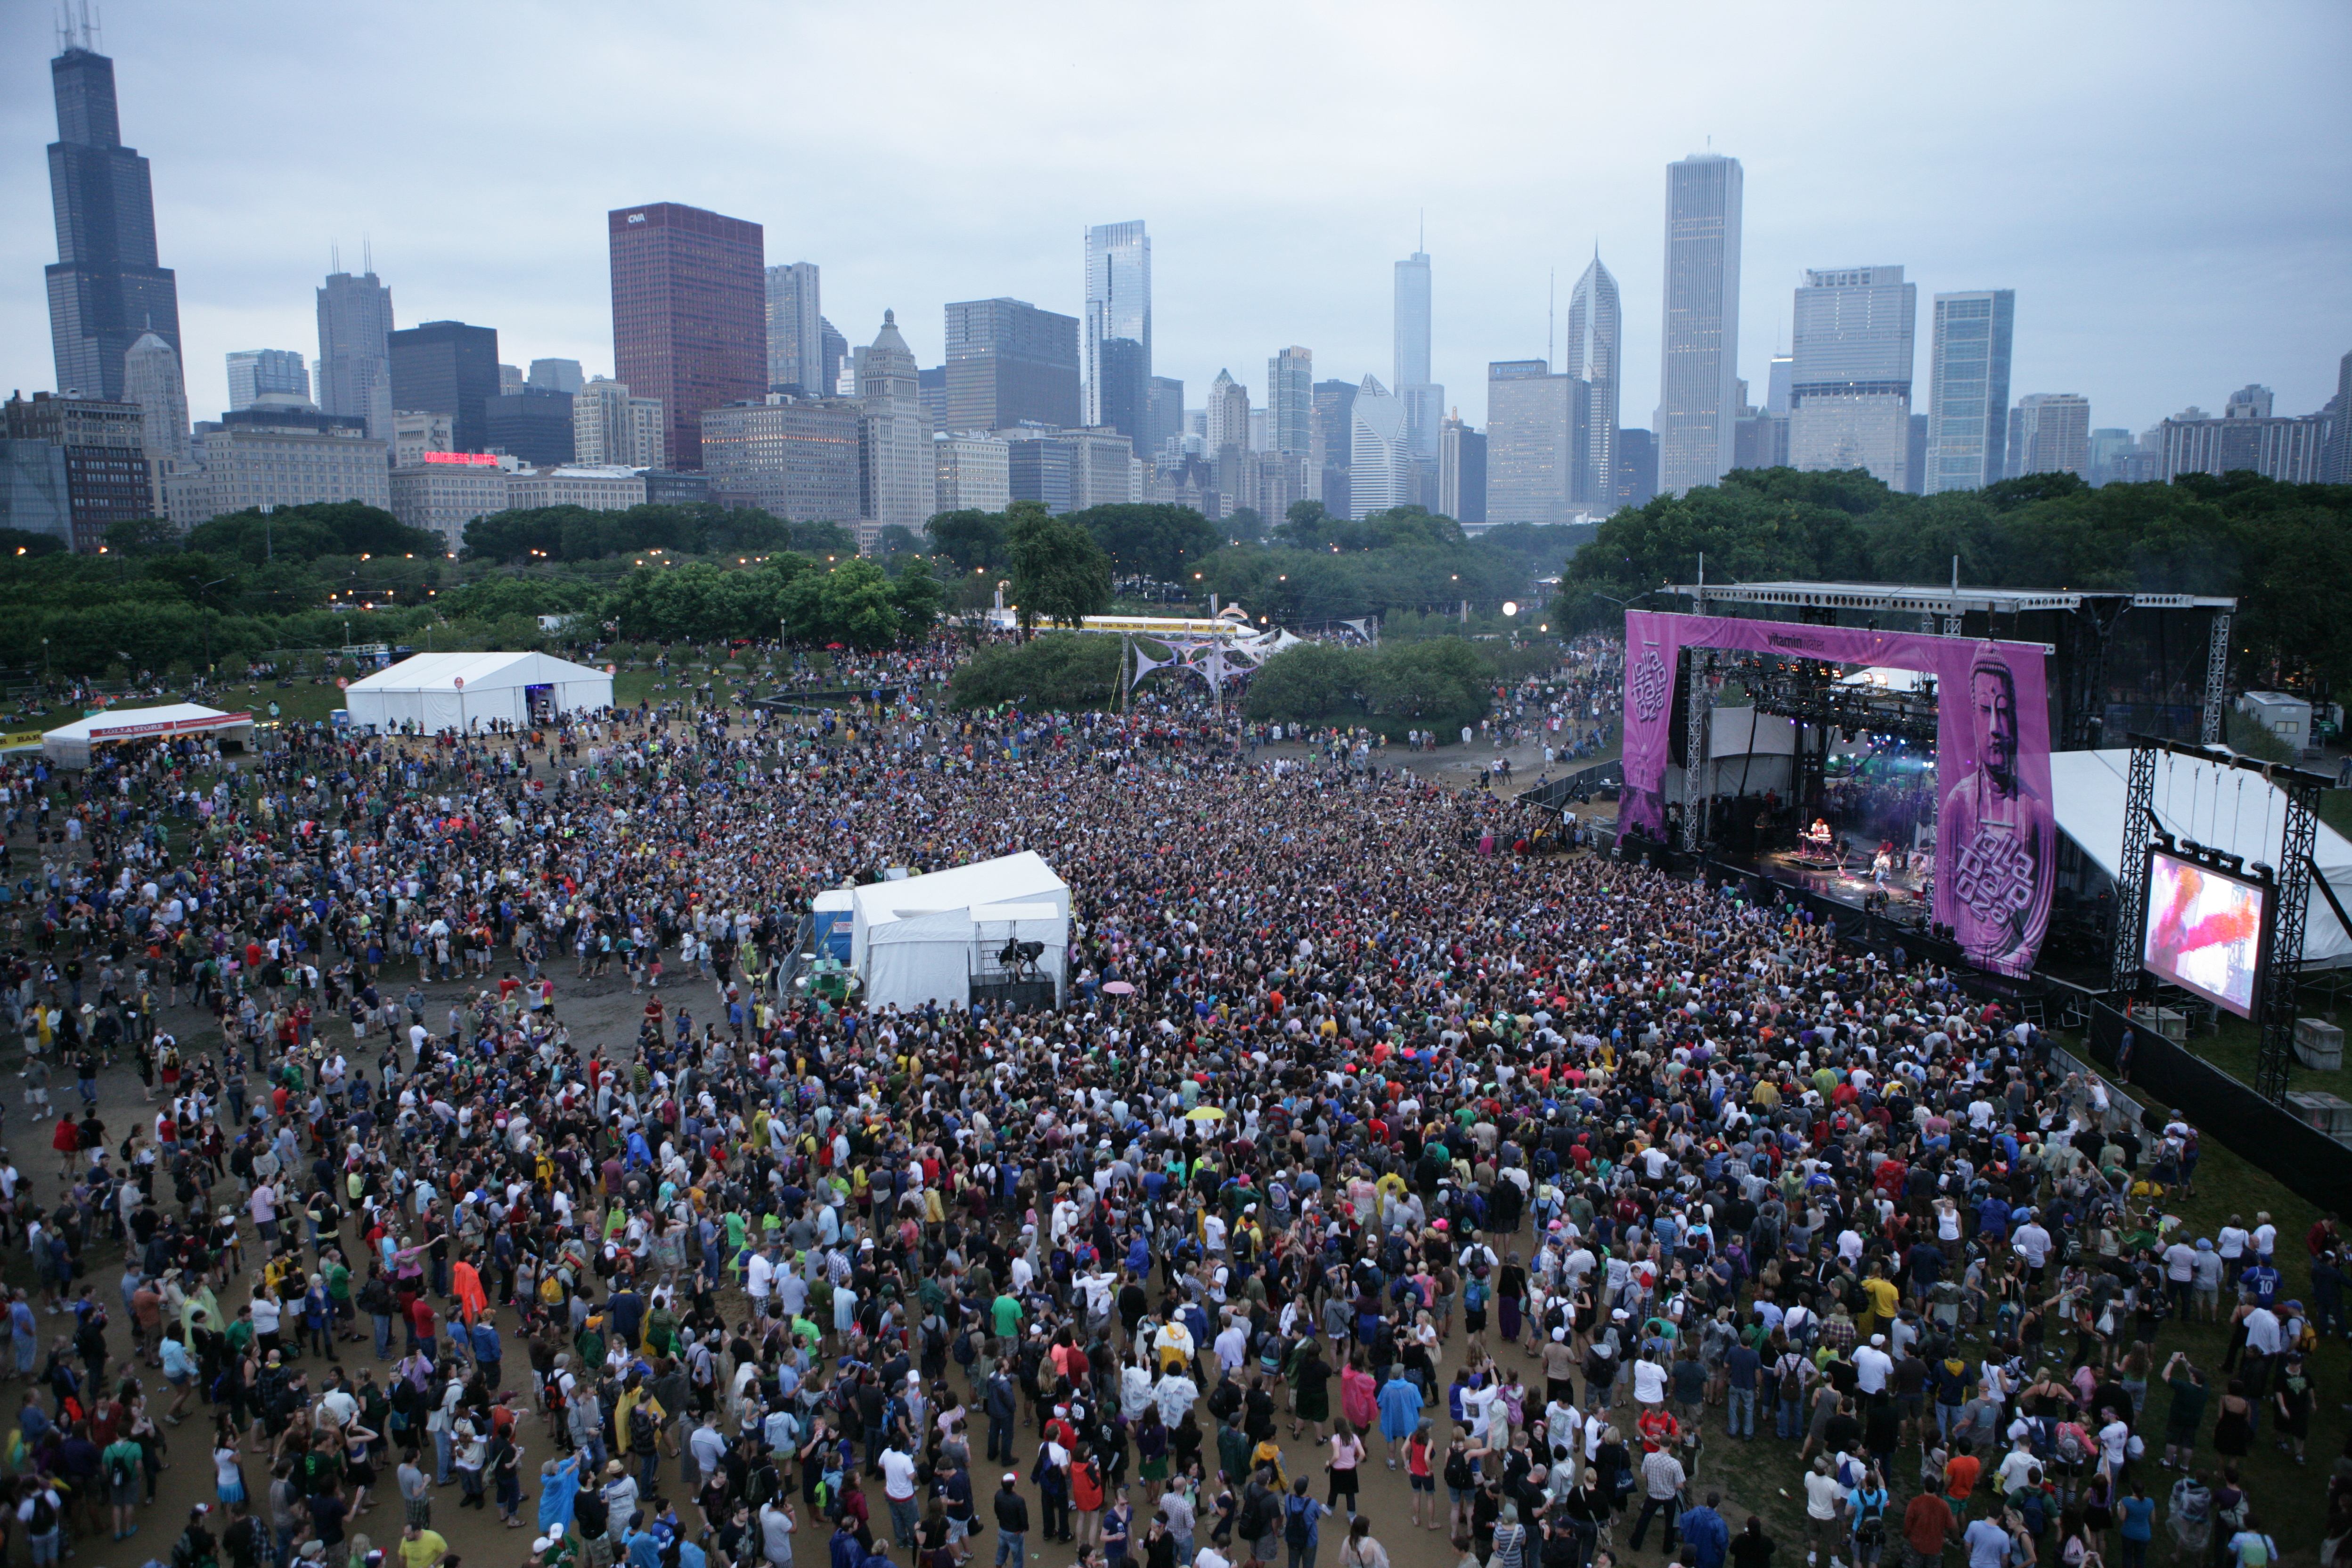 Lollapalooza: why the Chicago music festival is a cut above the